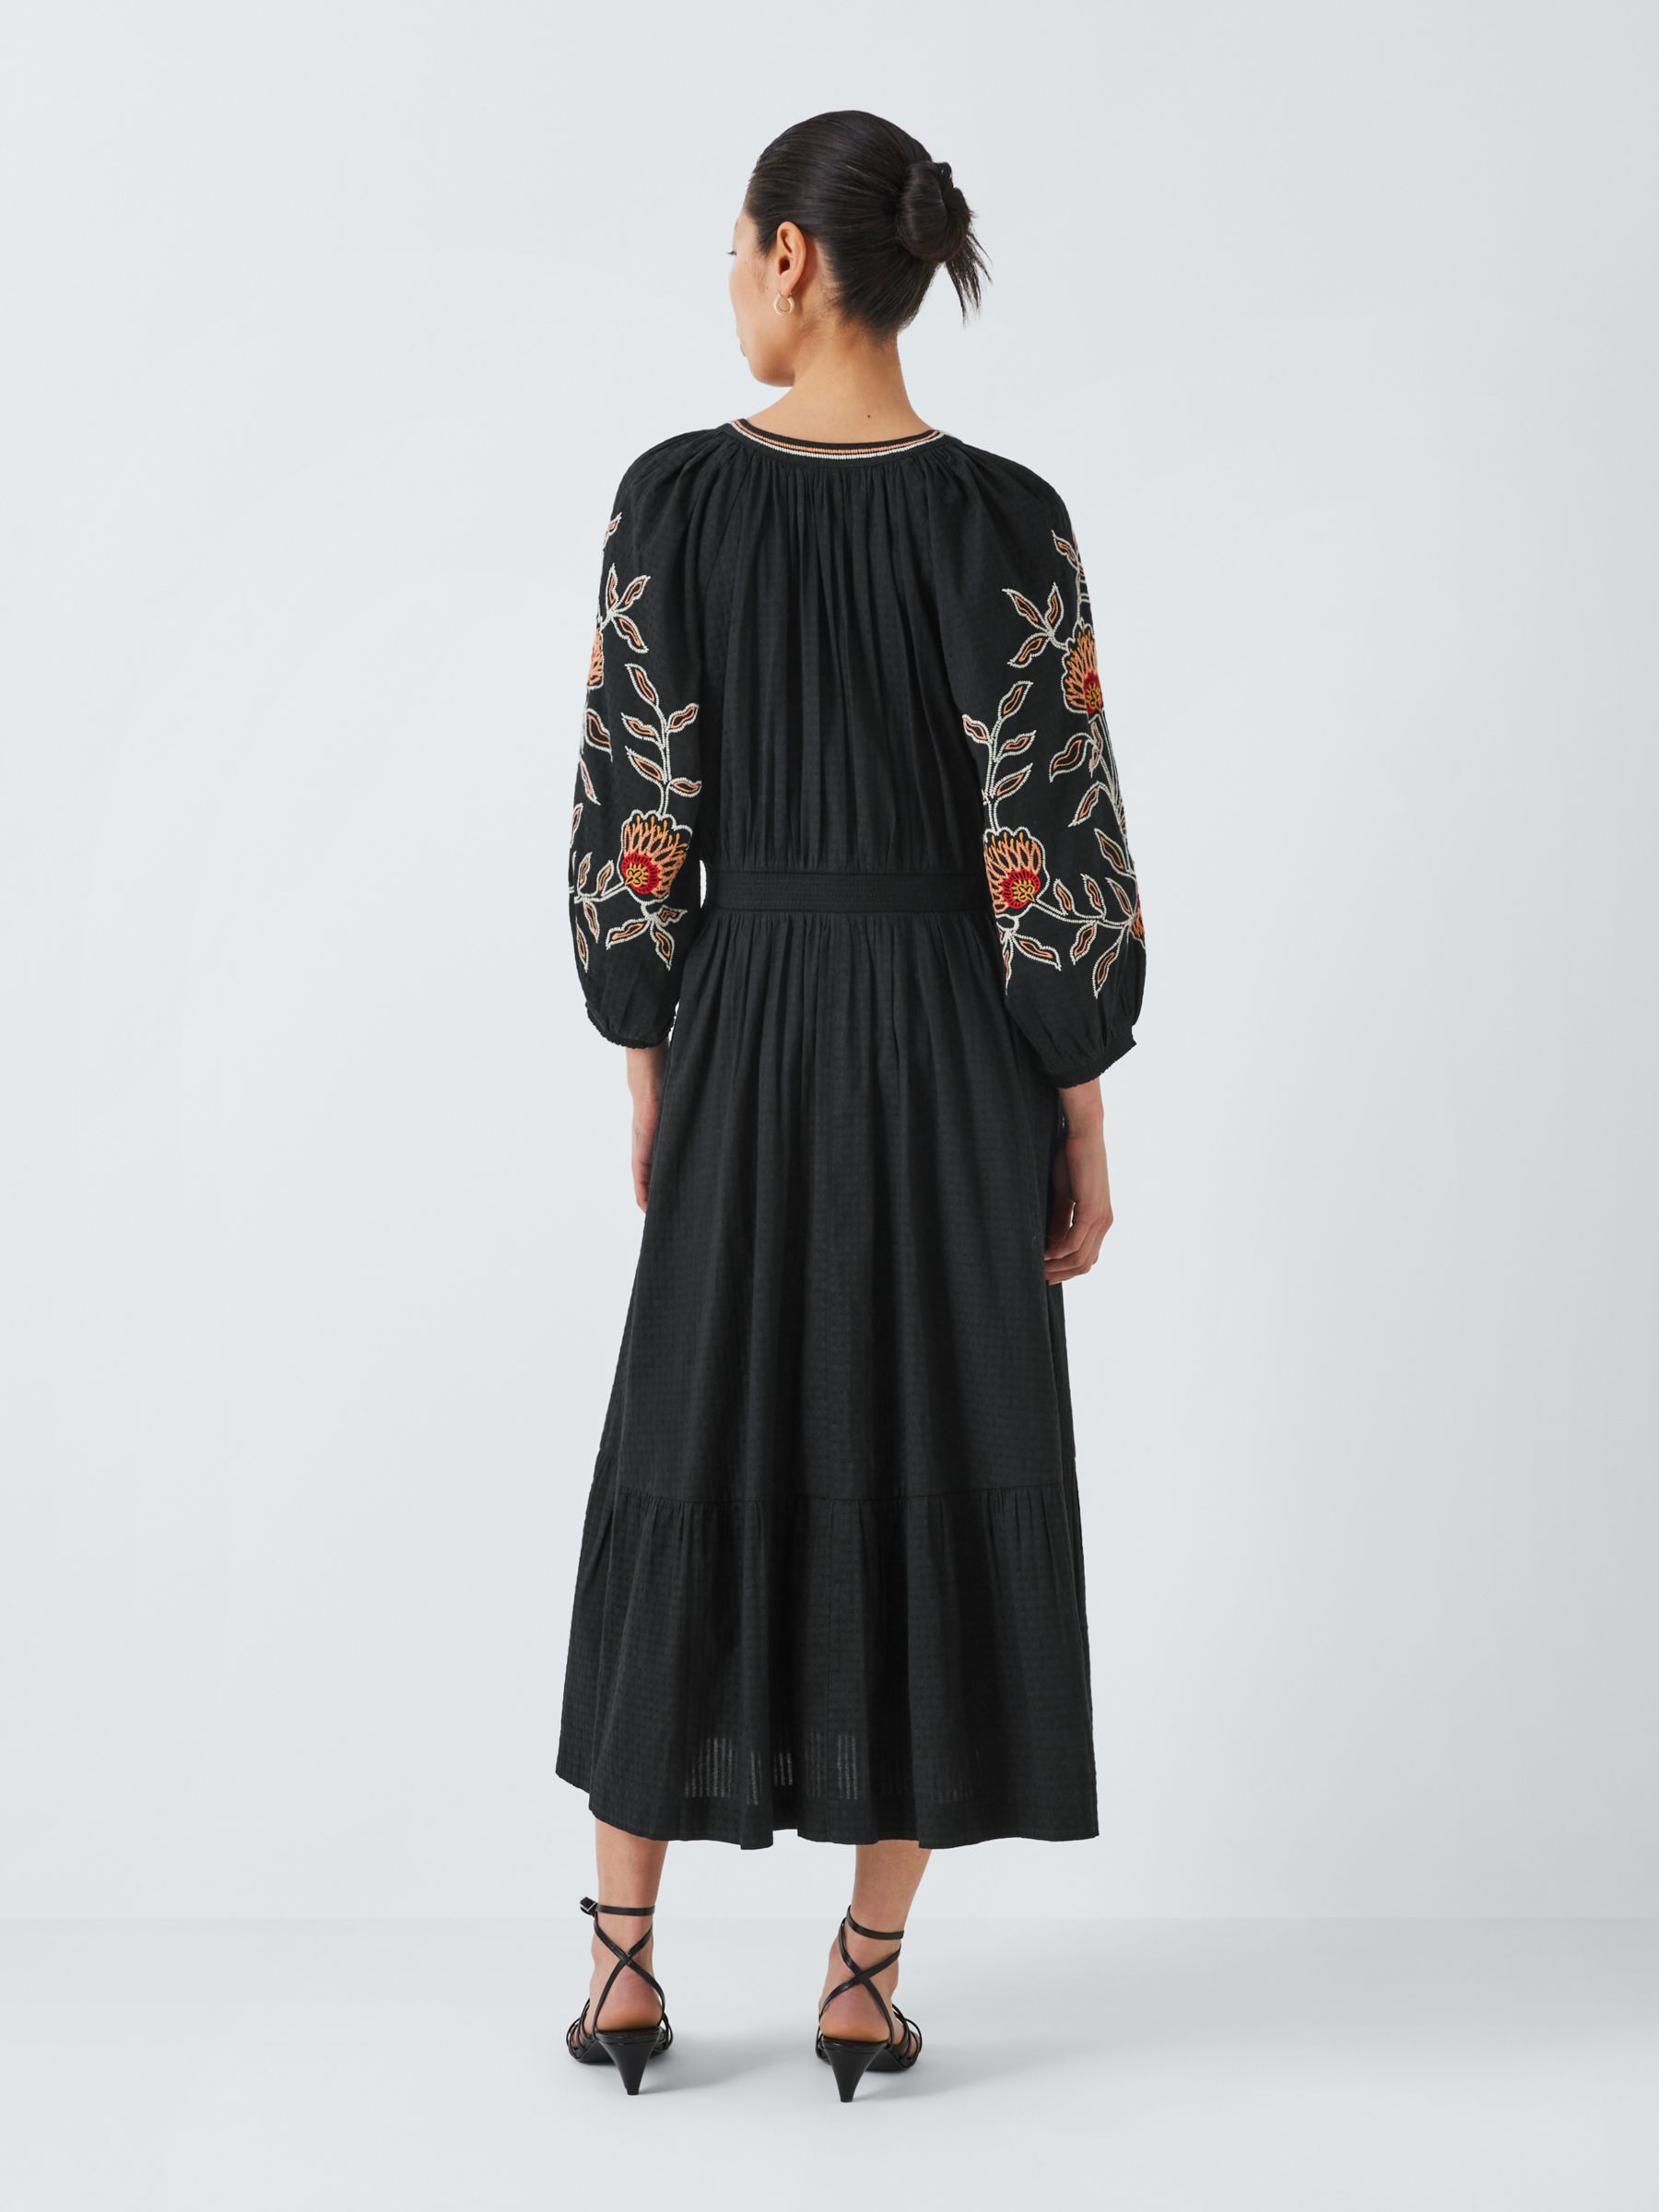 AND/OR Nirvana Embroidered Dress, Black, 6